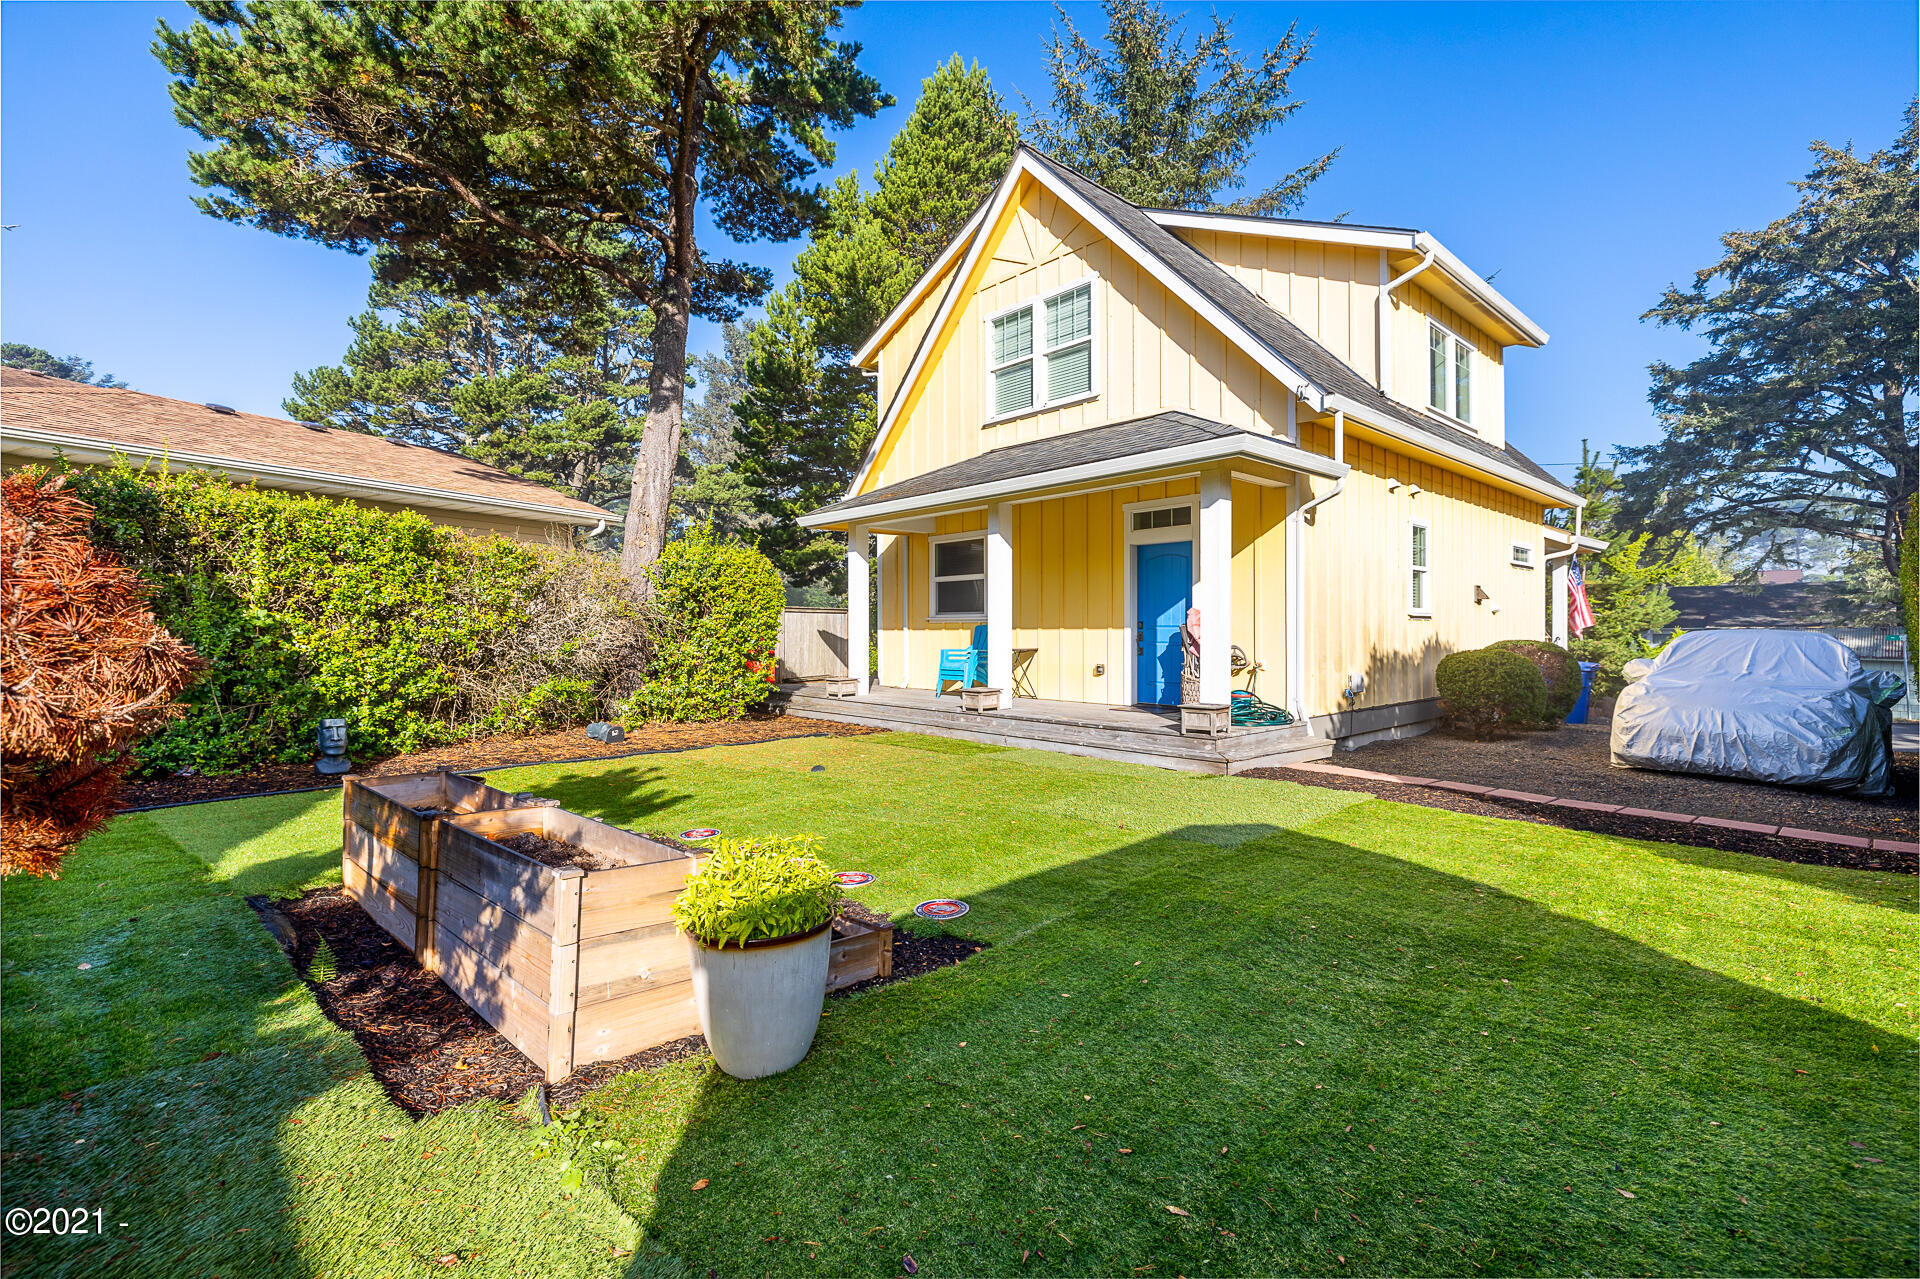 30 NW Vista St Depoe Bay, Gleneden Beach, Lincoln City, Newport, Otis, Rose Lodge, Seal Rock, Waldport, Yachats, To Home Listings - Amy Plechaty, Emerald Coast Realty Real Estate, homes for sale, property for sale